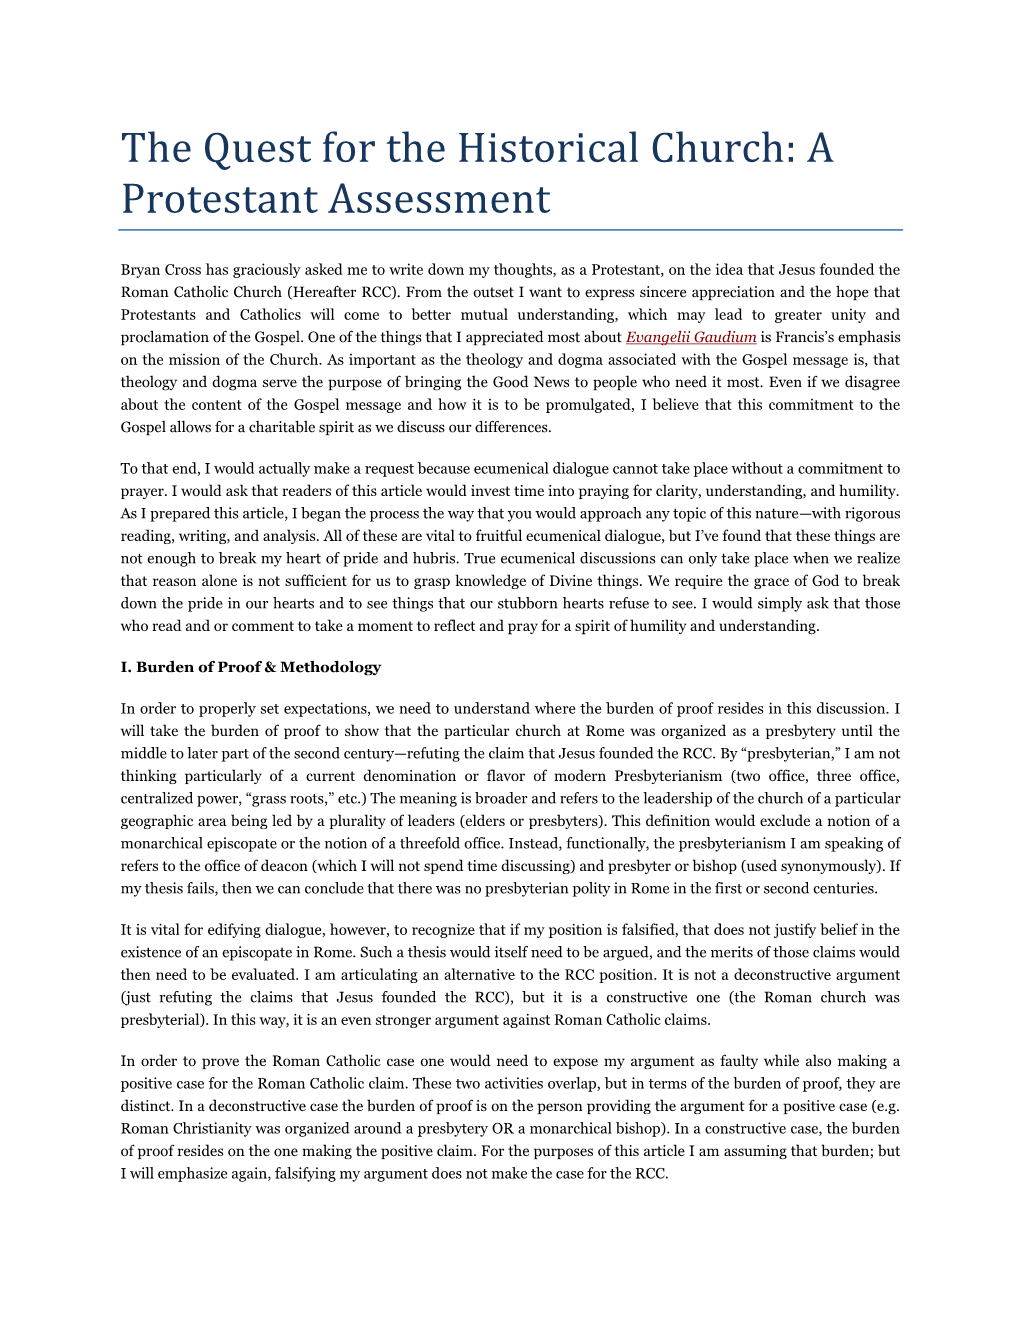 The Quest for the Historical Church: a Protestant Assessment